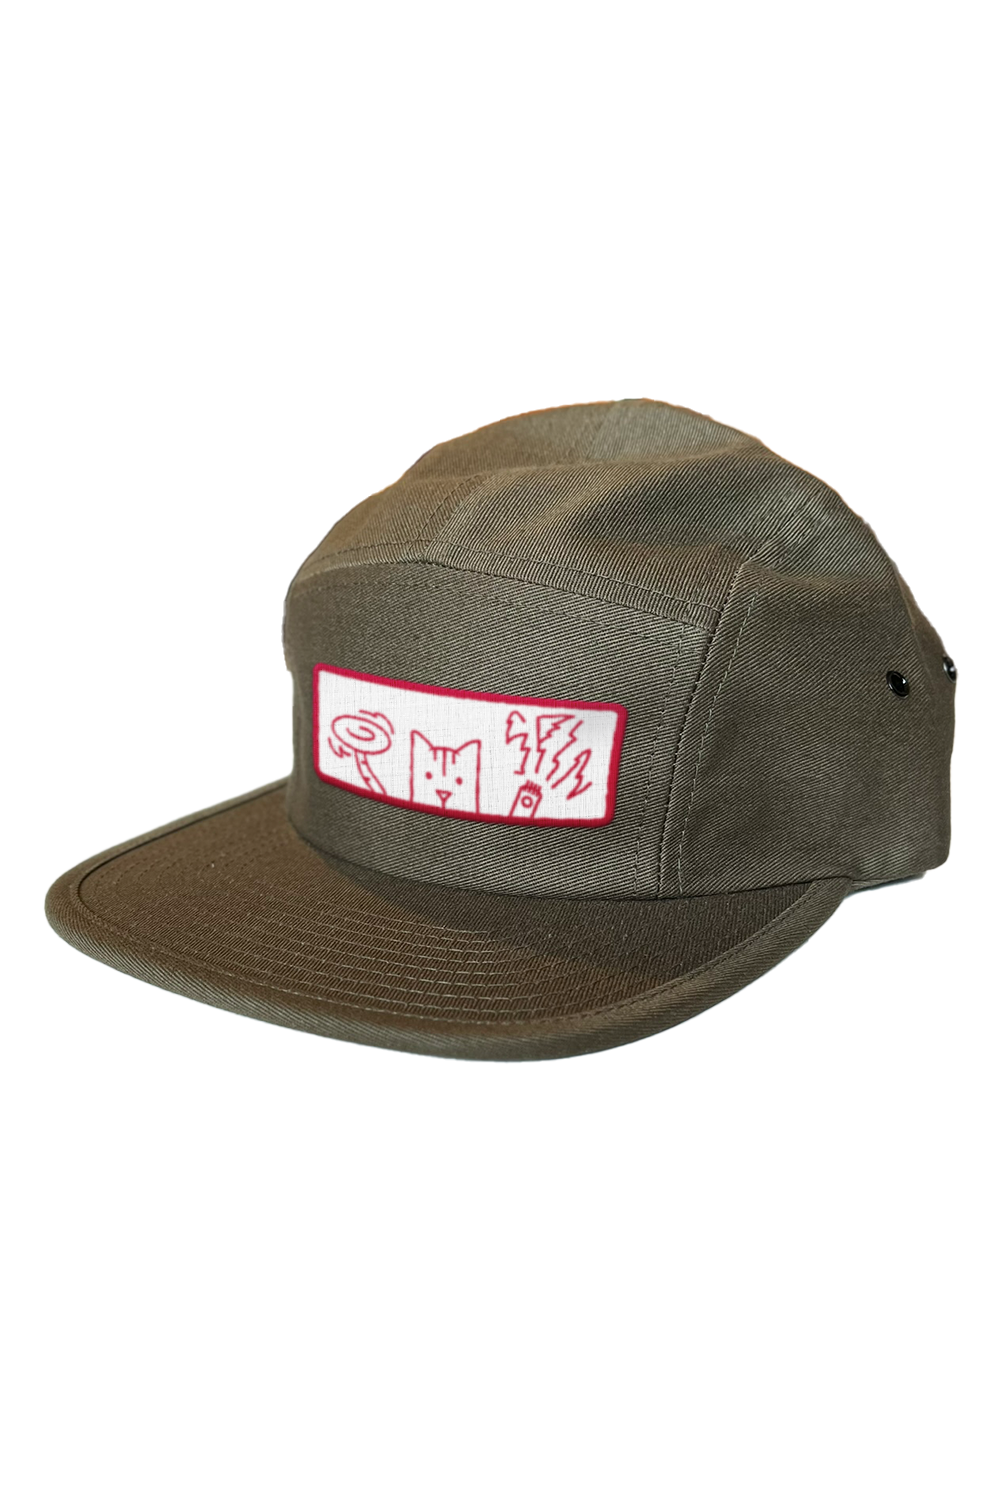 Molly the Cat 5 Panel Hat